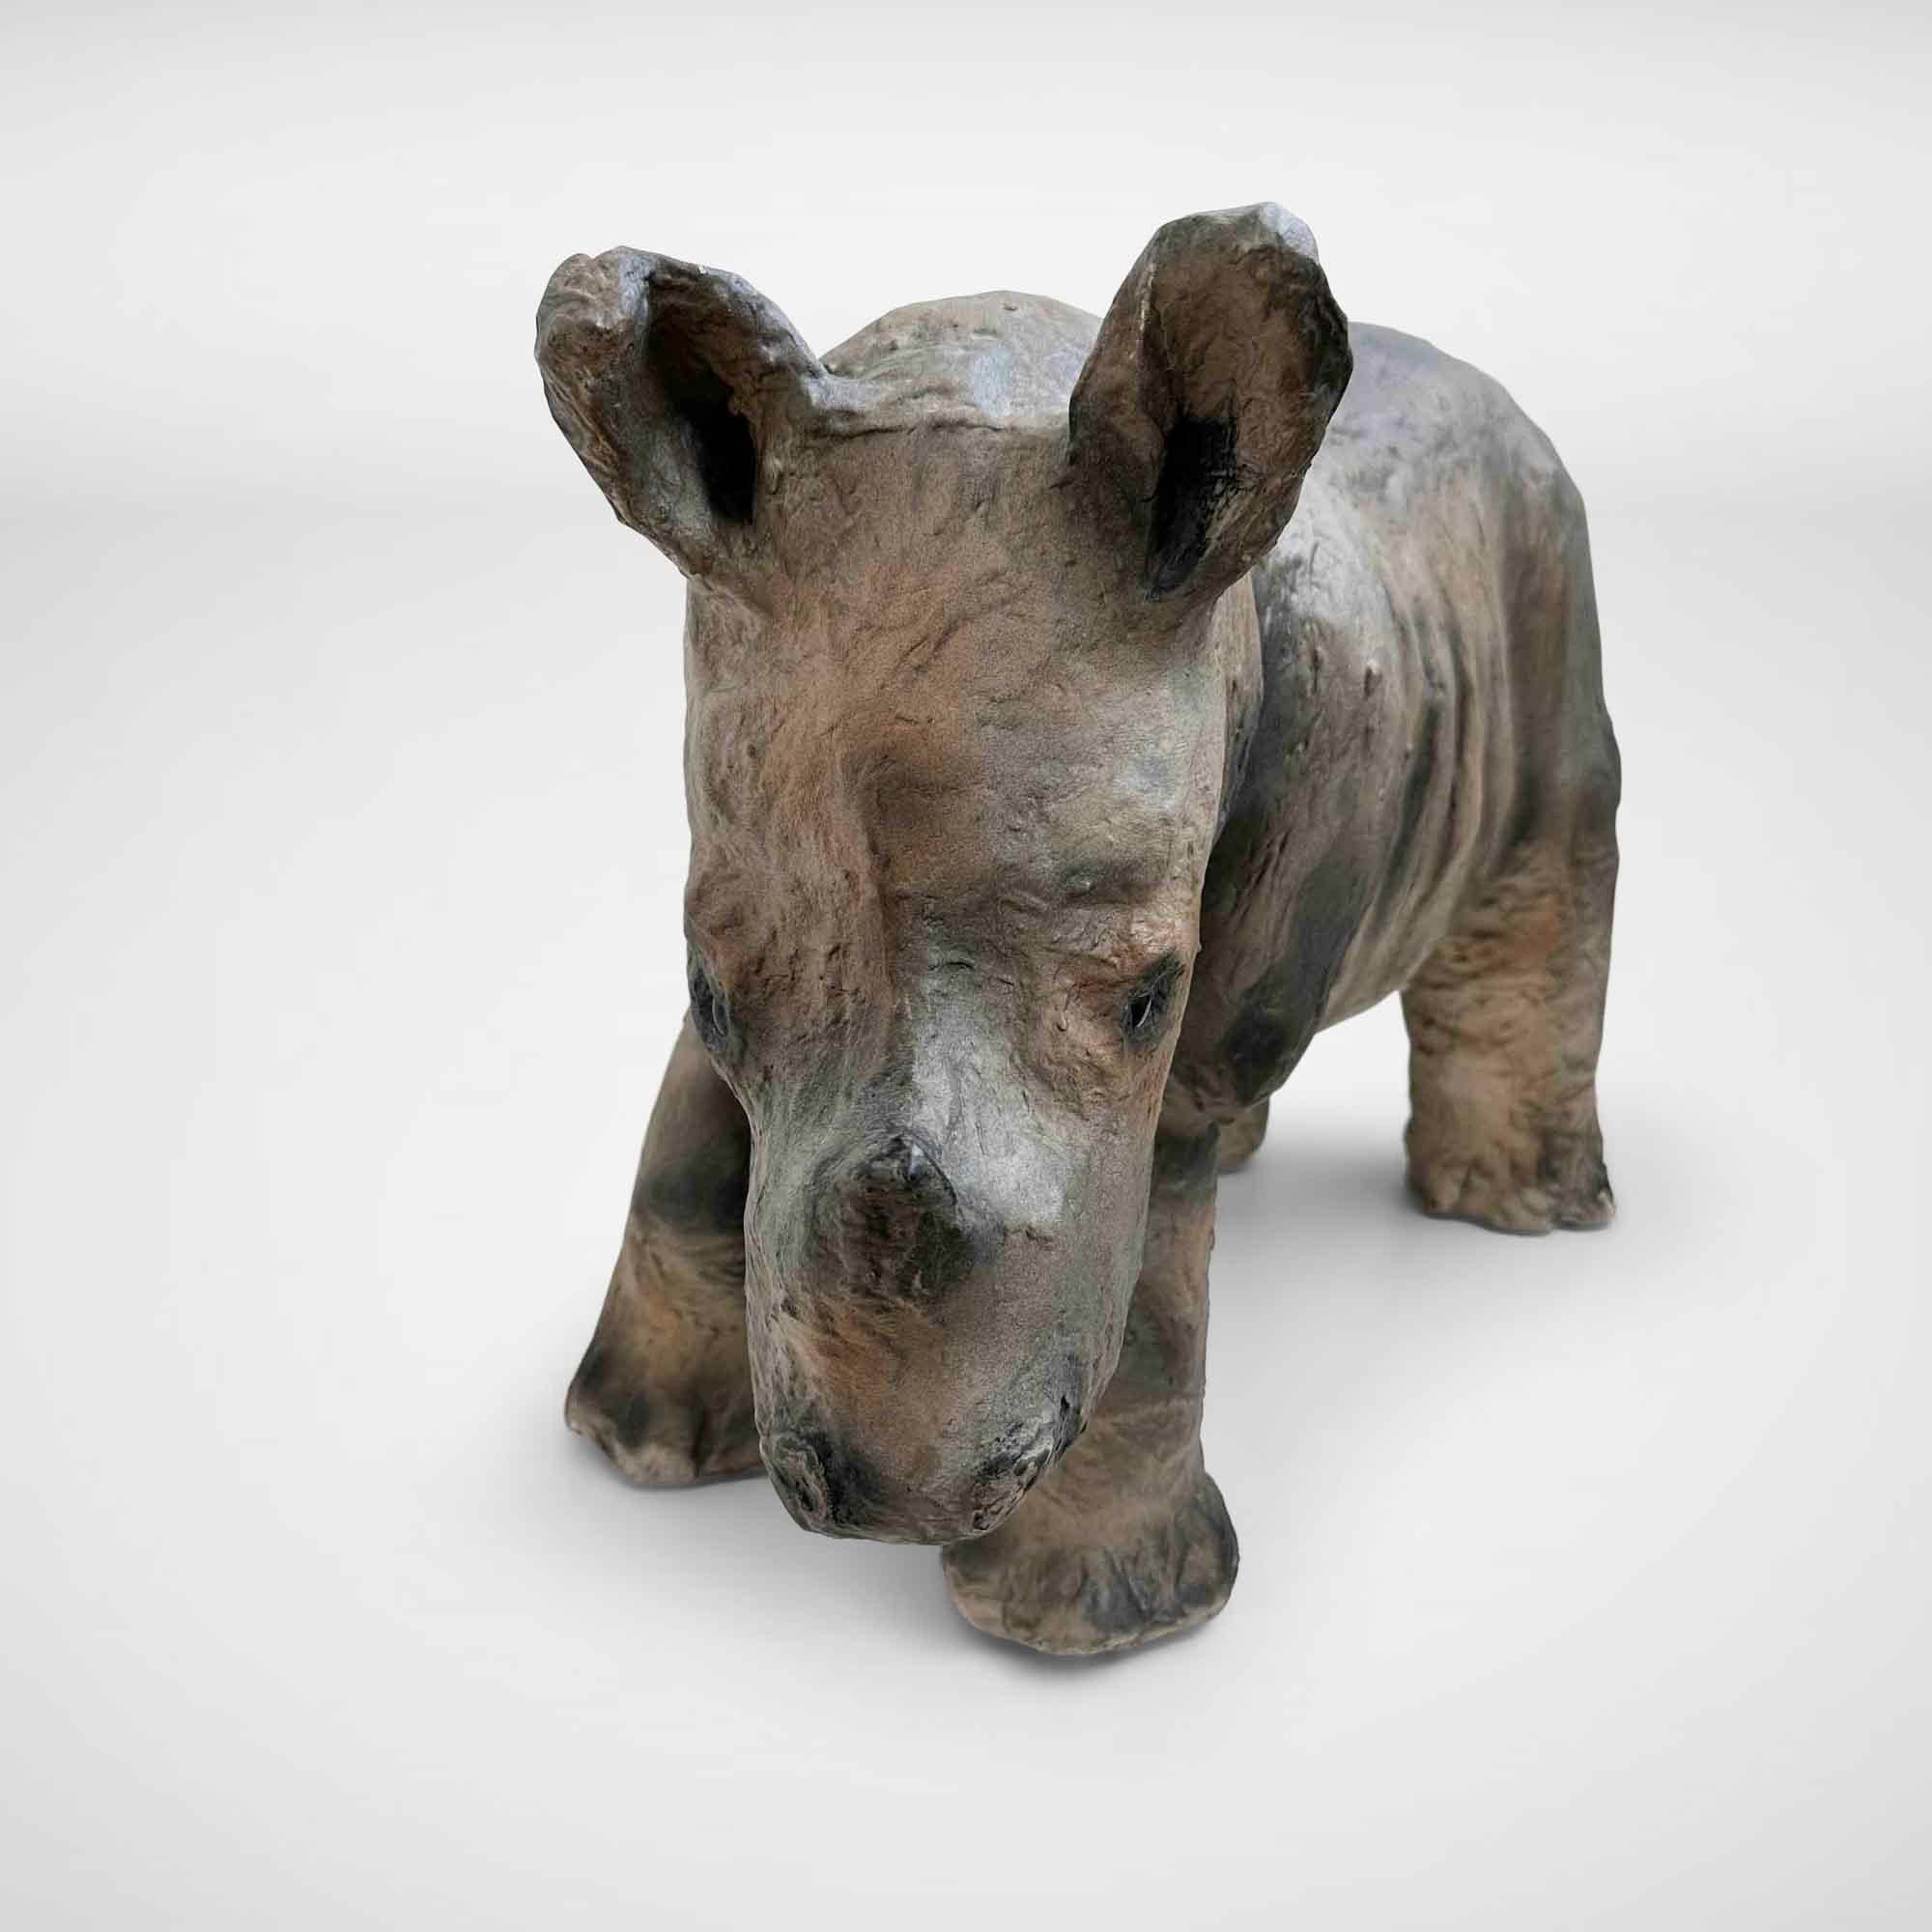 A realistic baby rhino made of paper mache. The legs and ears show slight signs of wear. This rhino is from the collection of a German museum and is still in completely original condition.

Germany, 1960s

Designer/Manufacturer: Unknown

In very